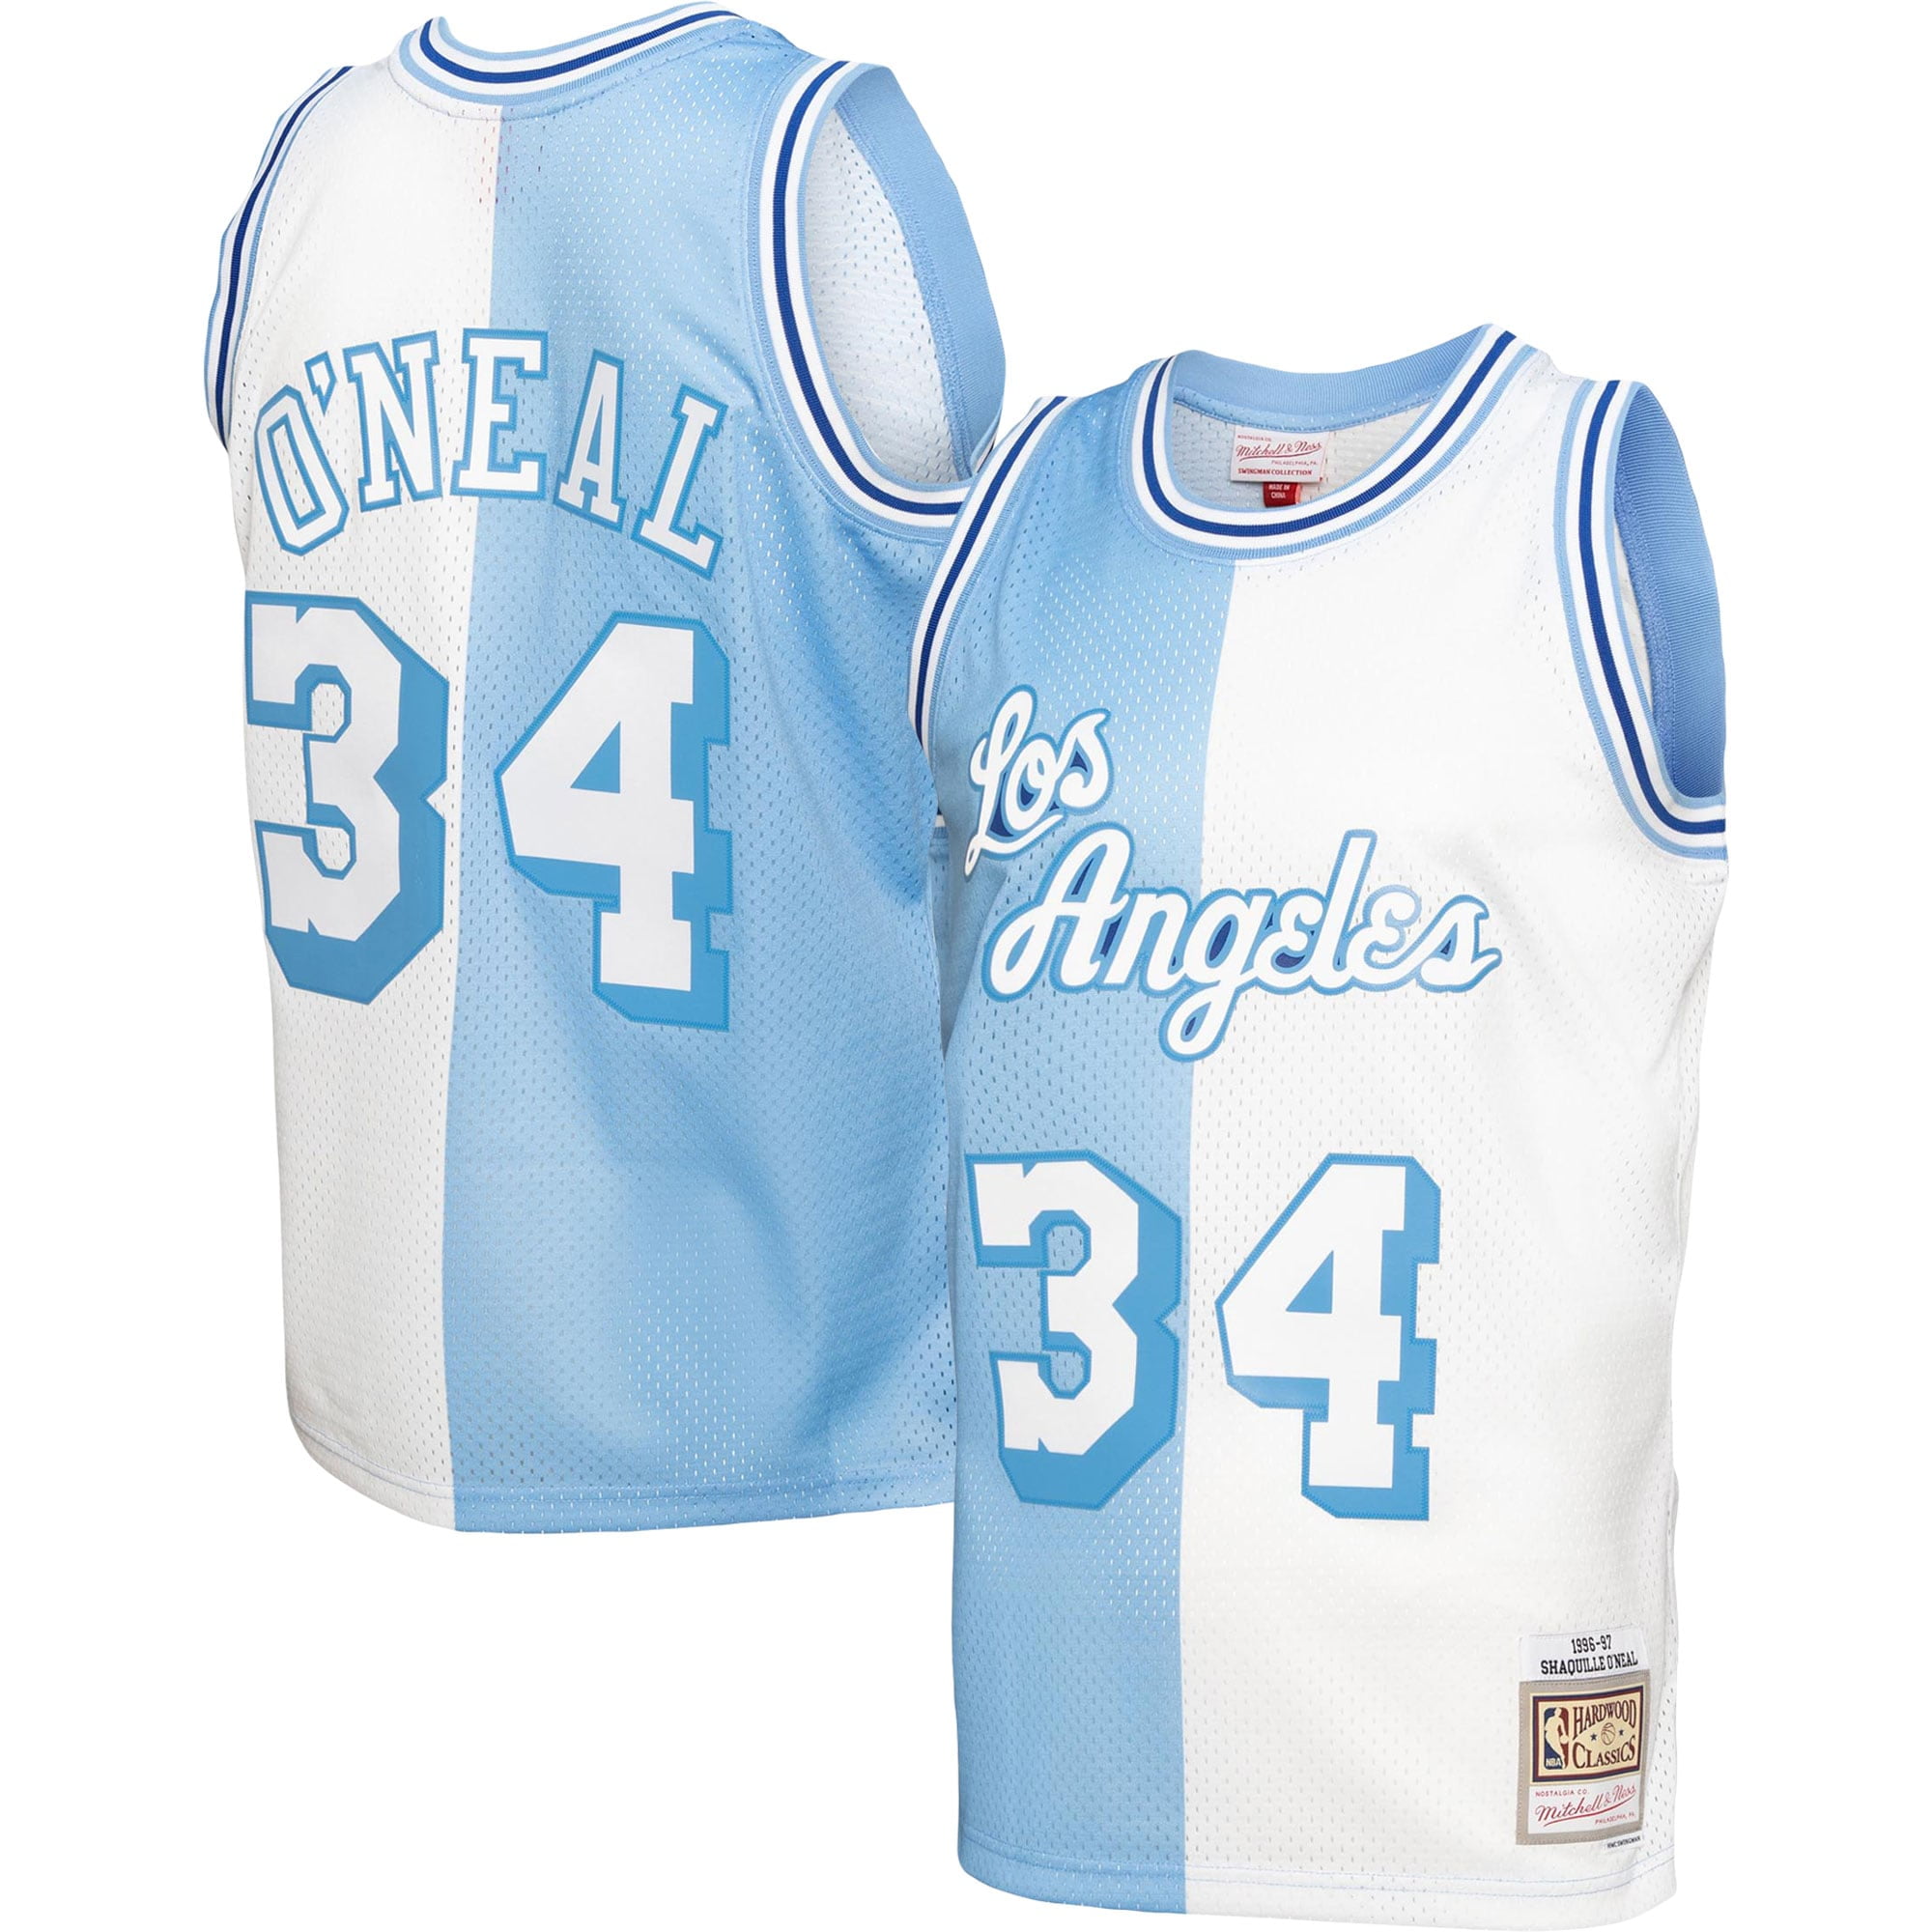 Mitchell & Ness Men's Mitchell & Ness Shaquille O'Neal Gold Los Angeles  Lakers Hardwood Classics Swingman Jersey